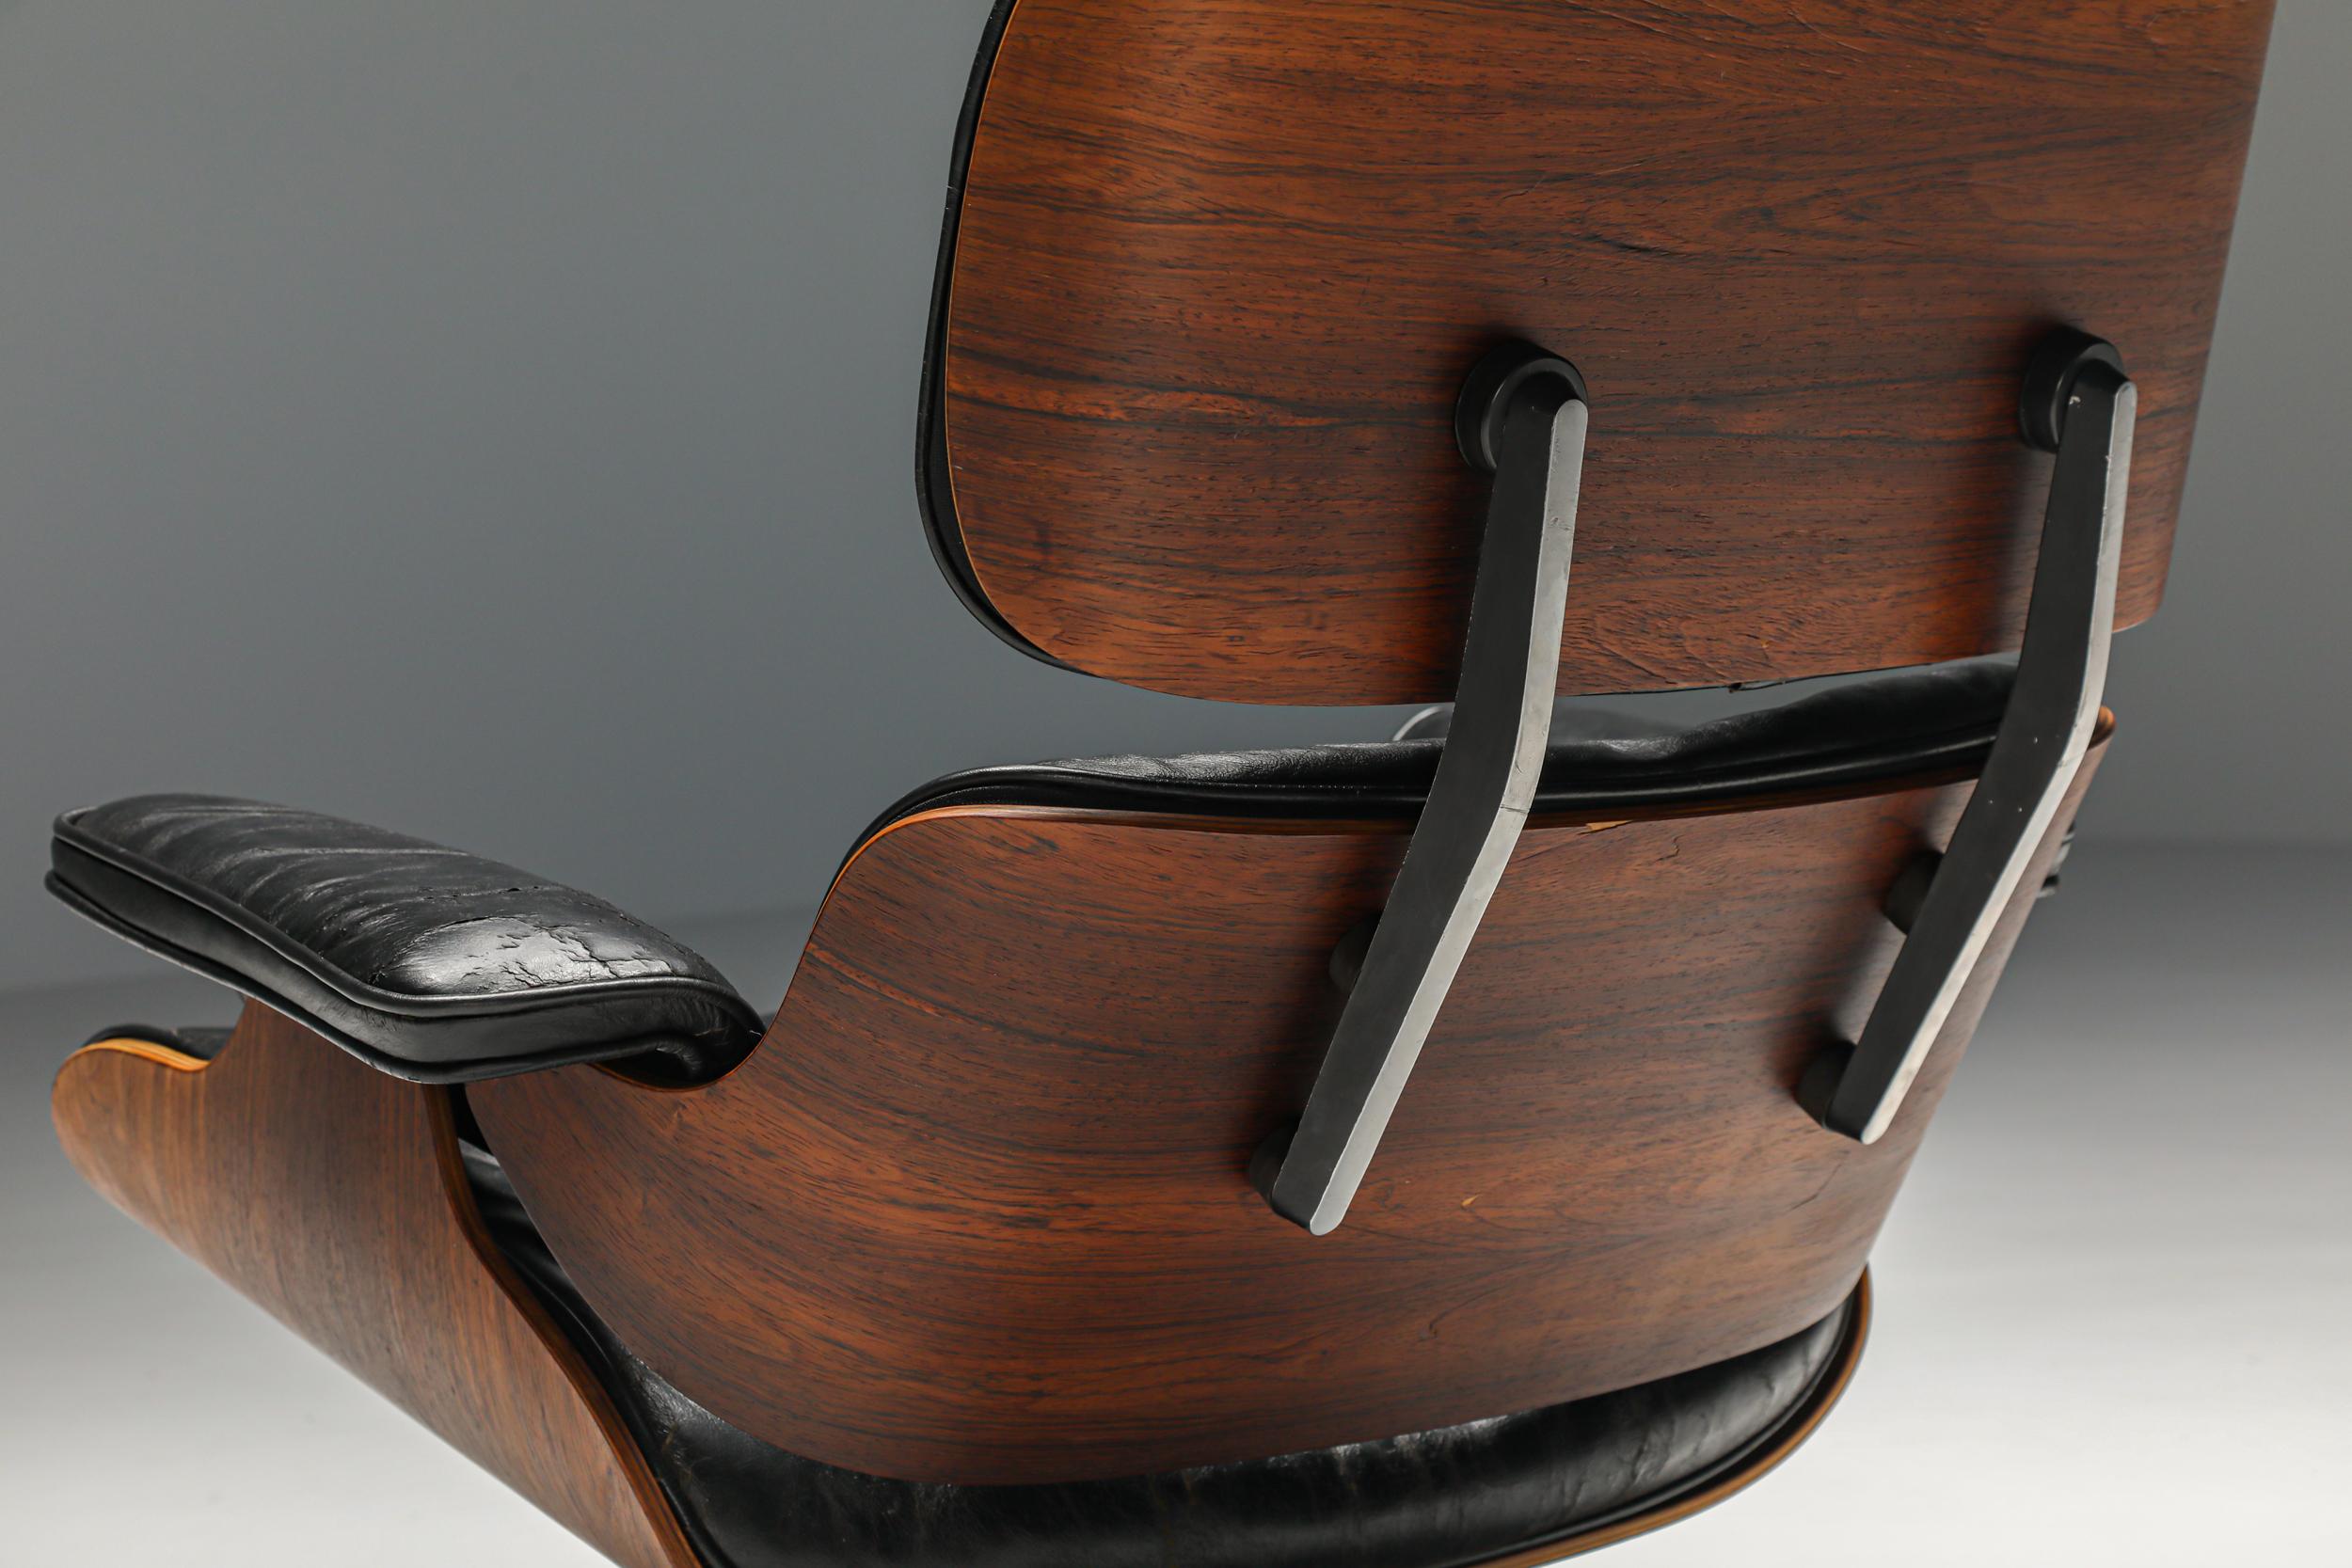 Mid-20th Century Eames Lounge Chair with Ottoman for Herman Miller, 1st Edition 57-59, Iconic